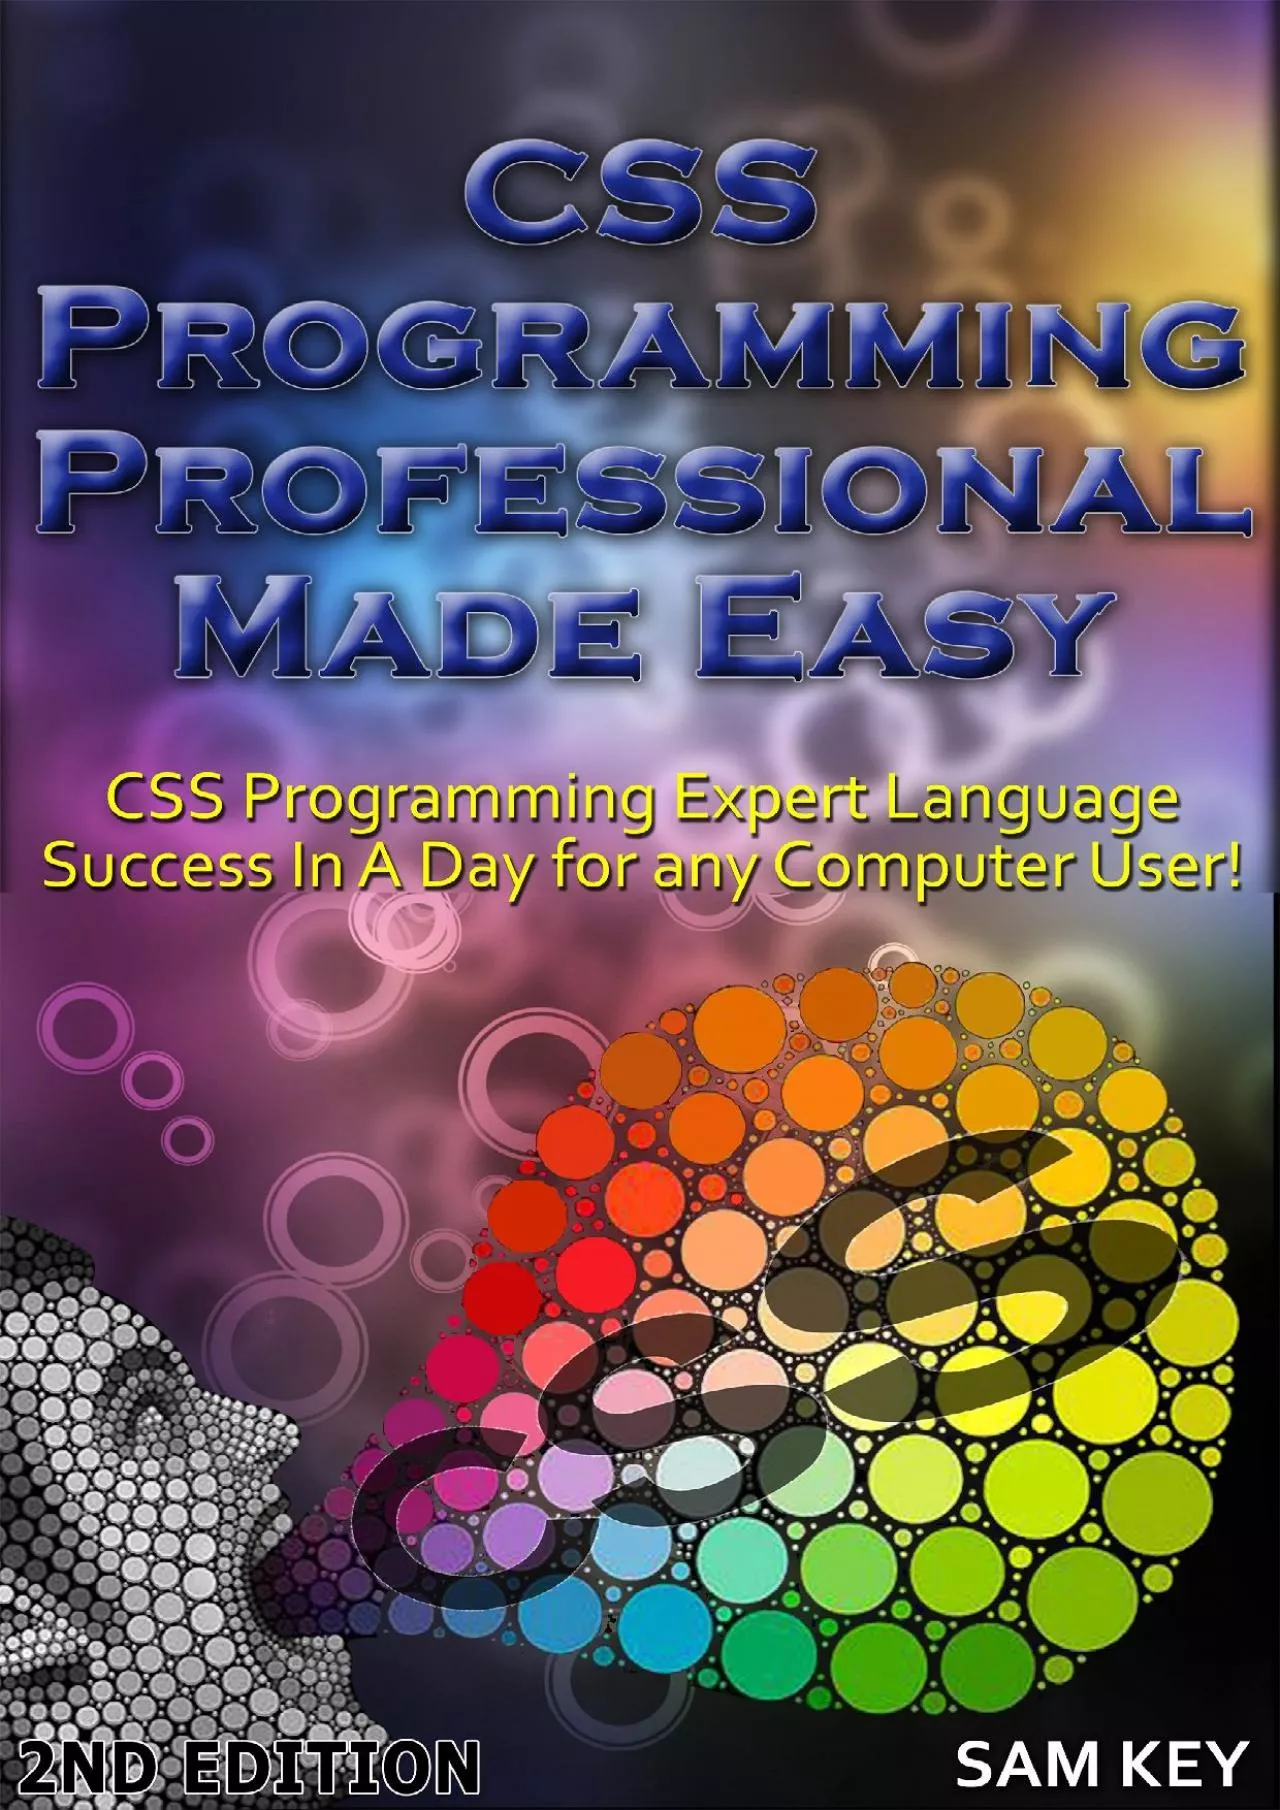 [DOWLOAD]-CSS Programming Professional Made Easy 2nd Edition: Expert CSS Programming Language